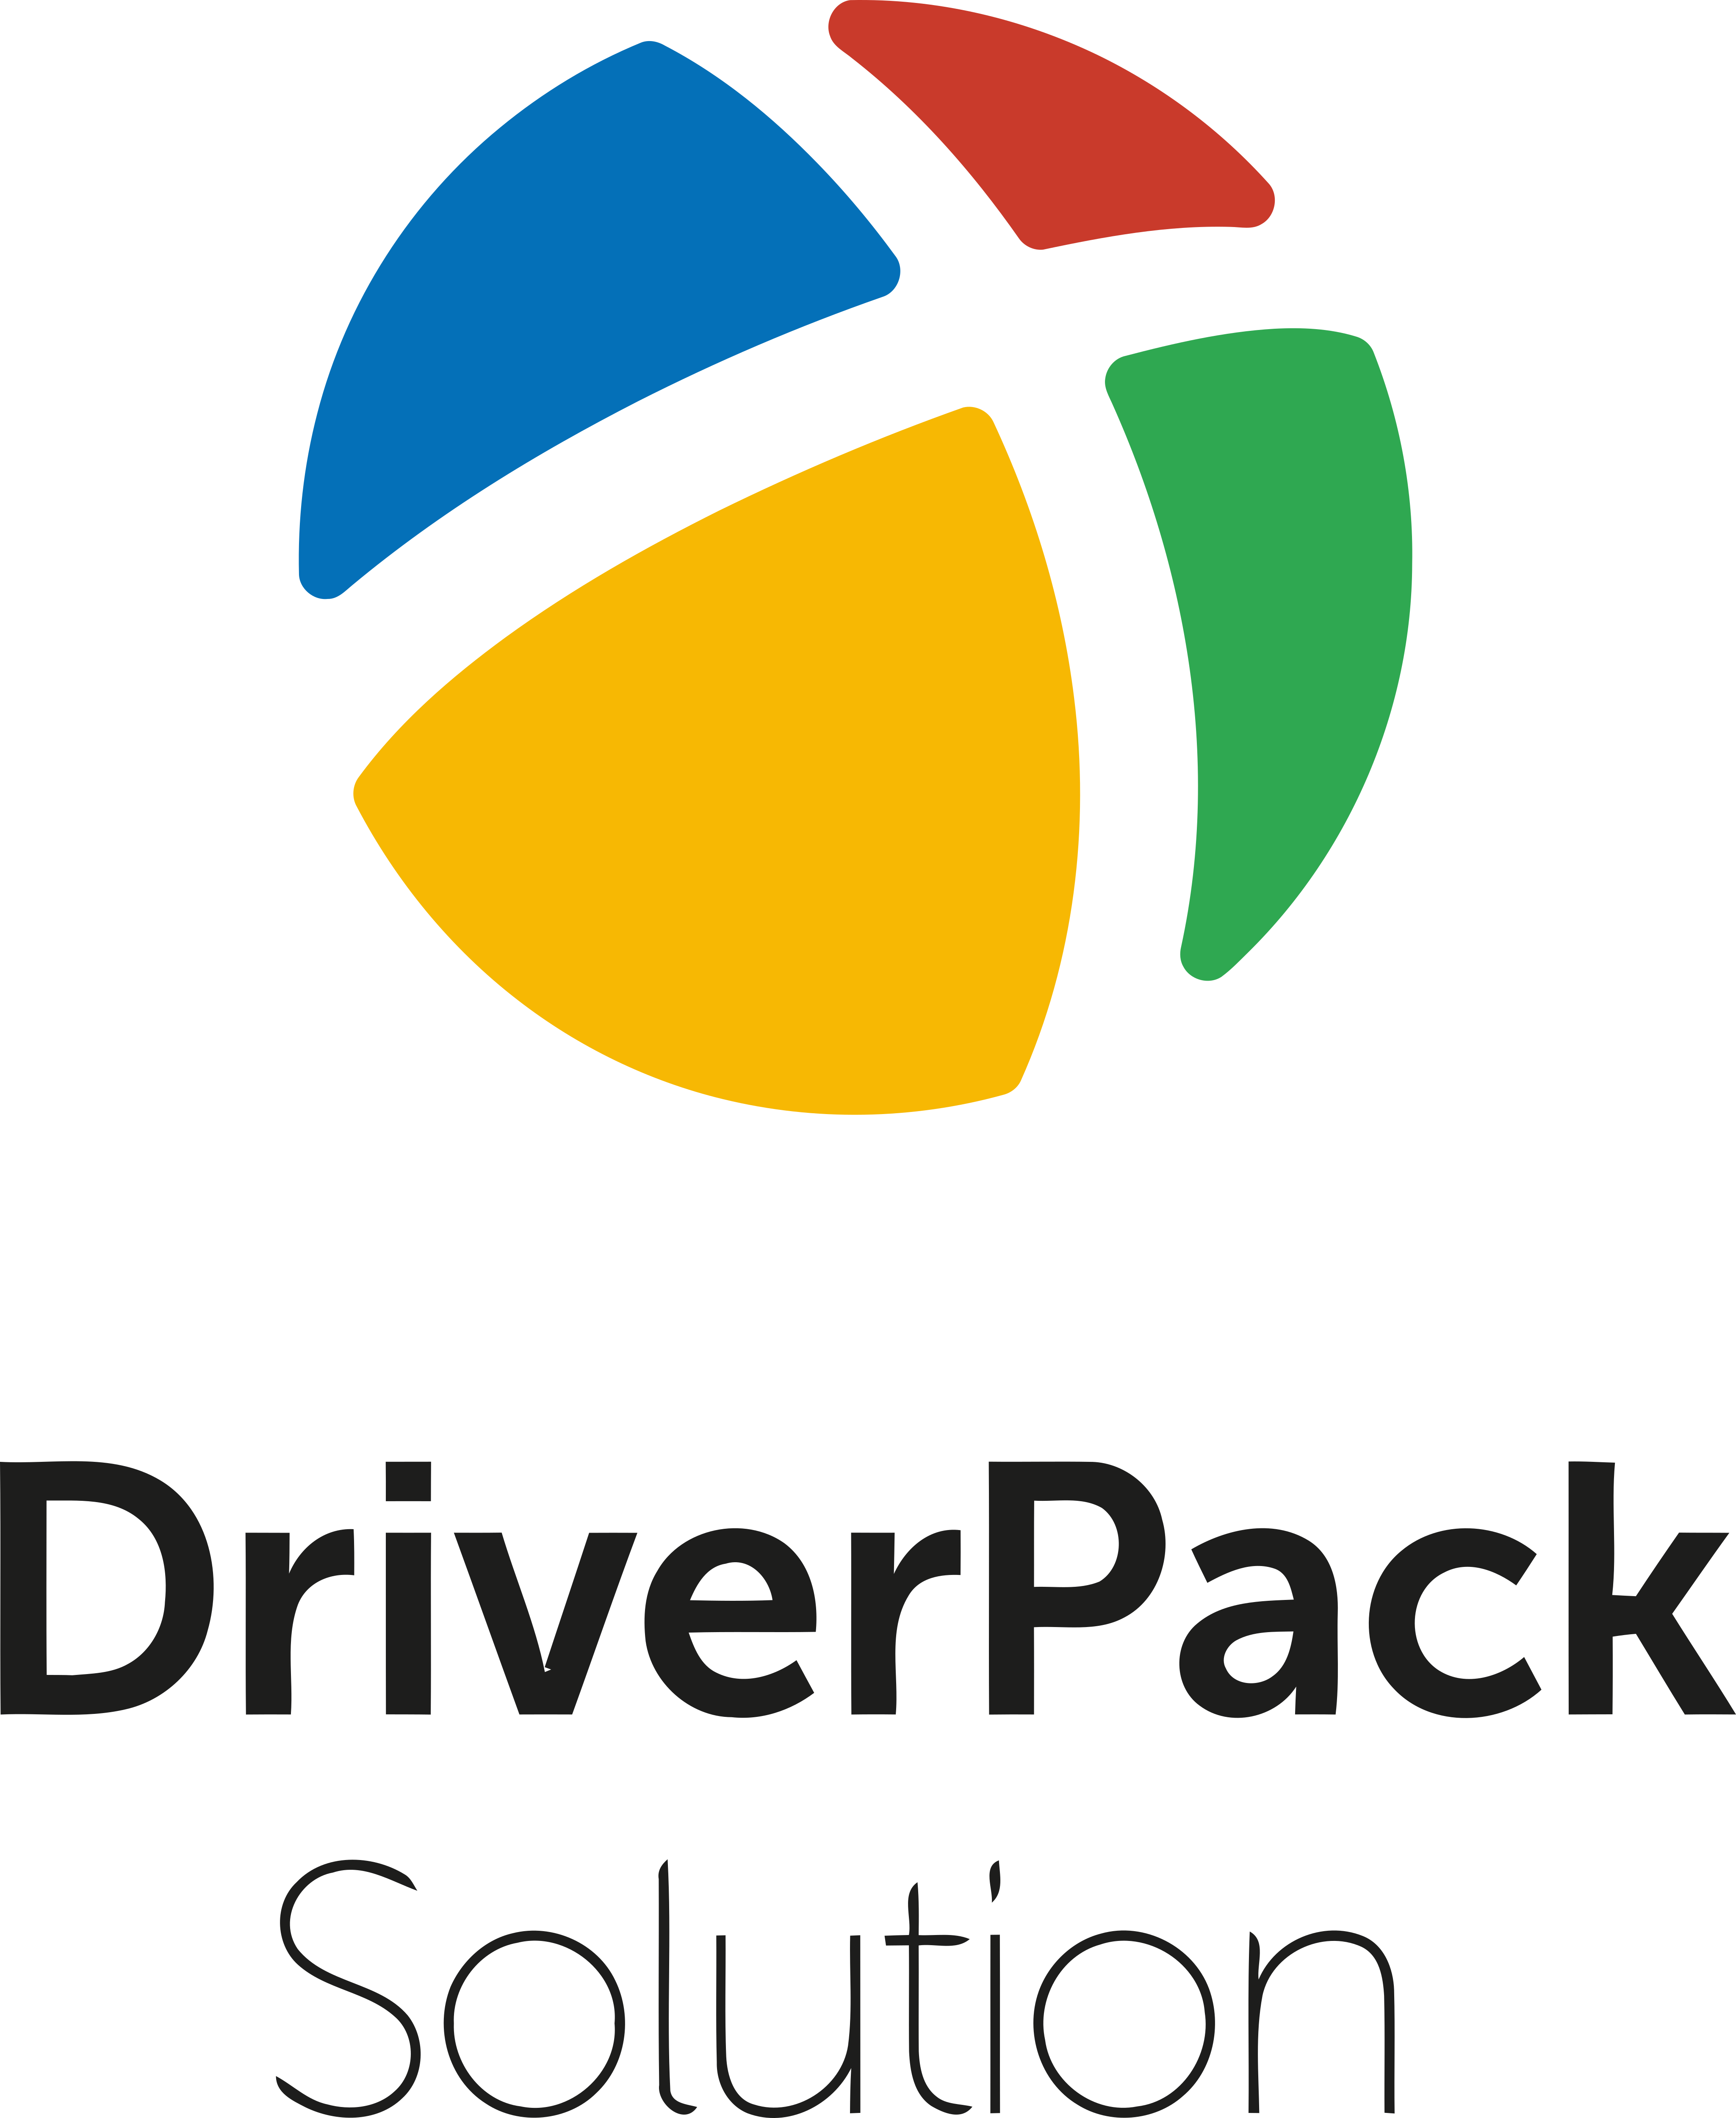 driverpack solution 15.11 full